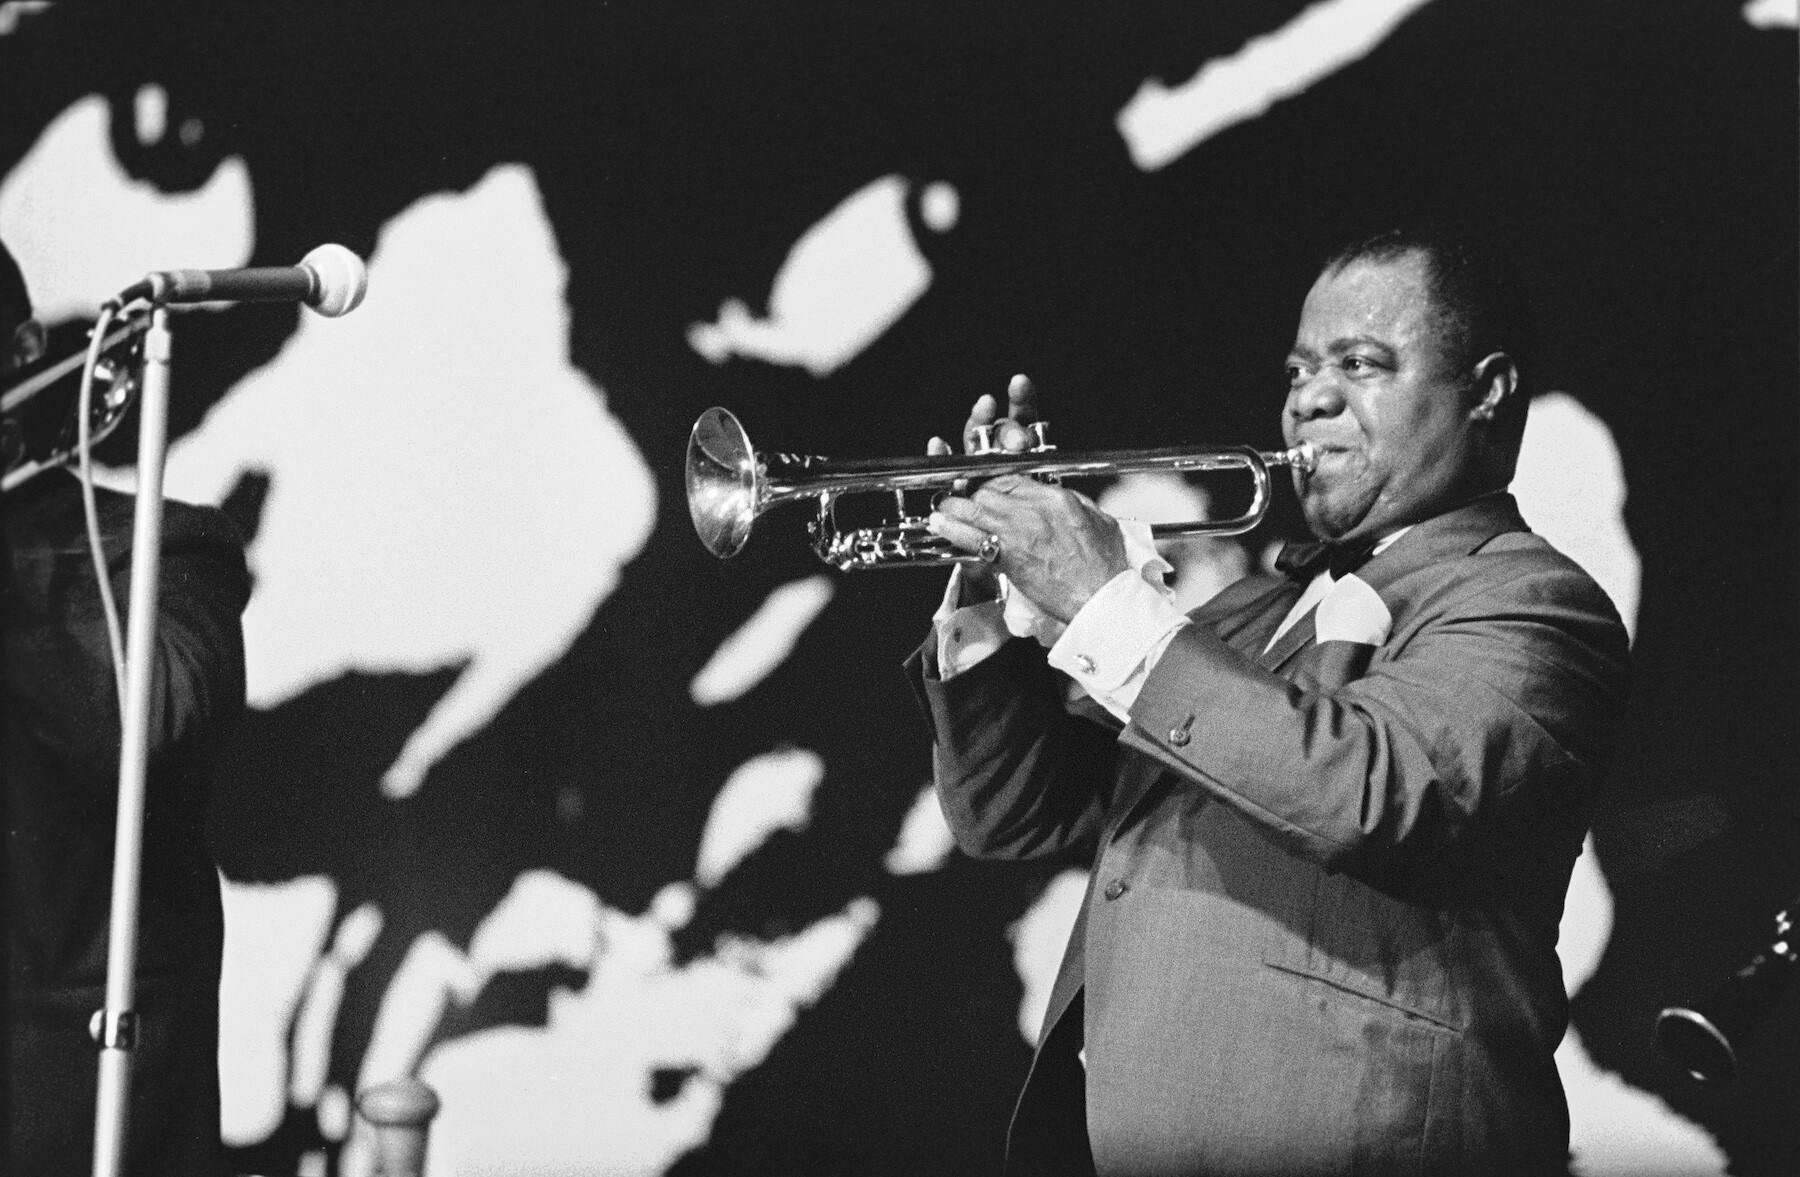 Black and white photo: Louis Armstrong stands on a stage playing the trumpet. Other musicians are only vaguely indicated in front of the black background.